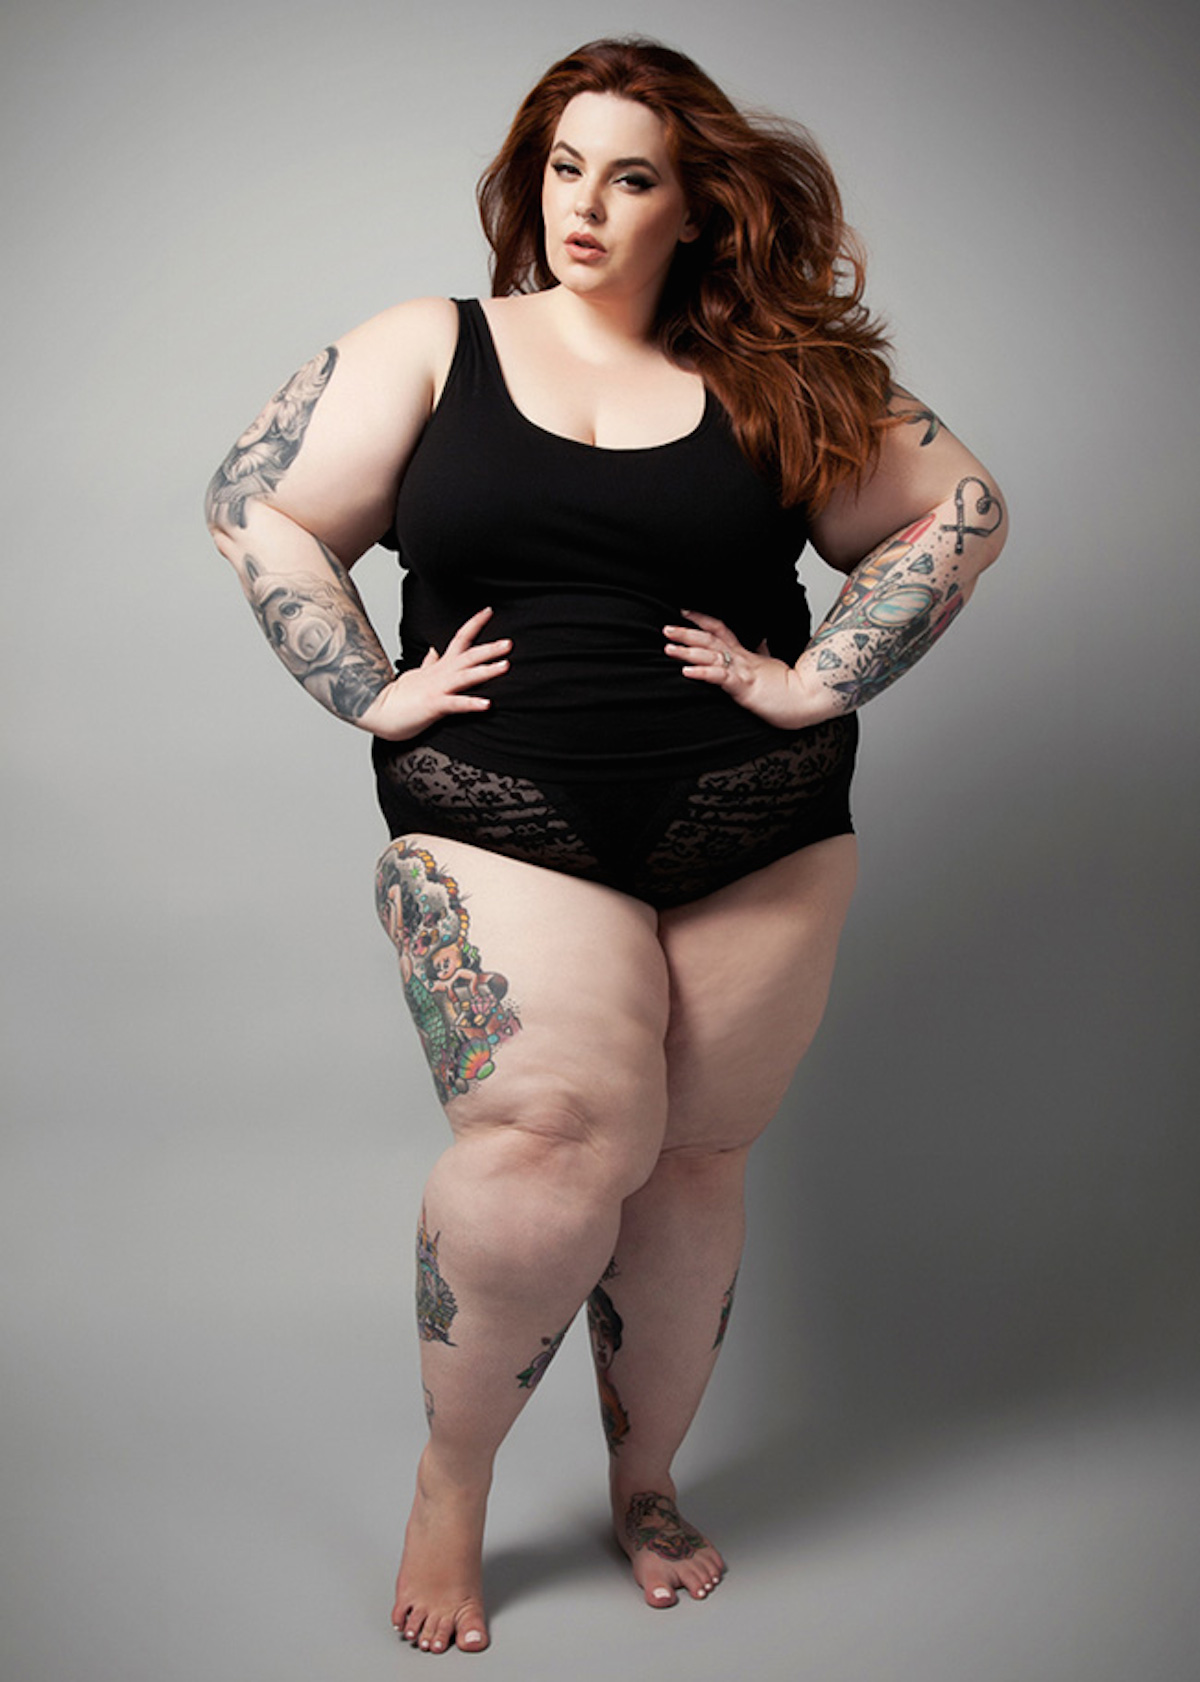 Hej donor politiker SIX PLUS SIZE MODELS ARE CHANGING THE GAME | THE UNTITLED MAGAZINE